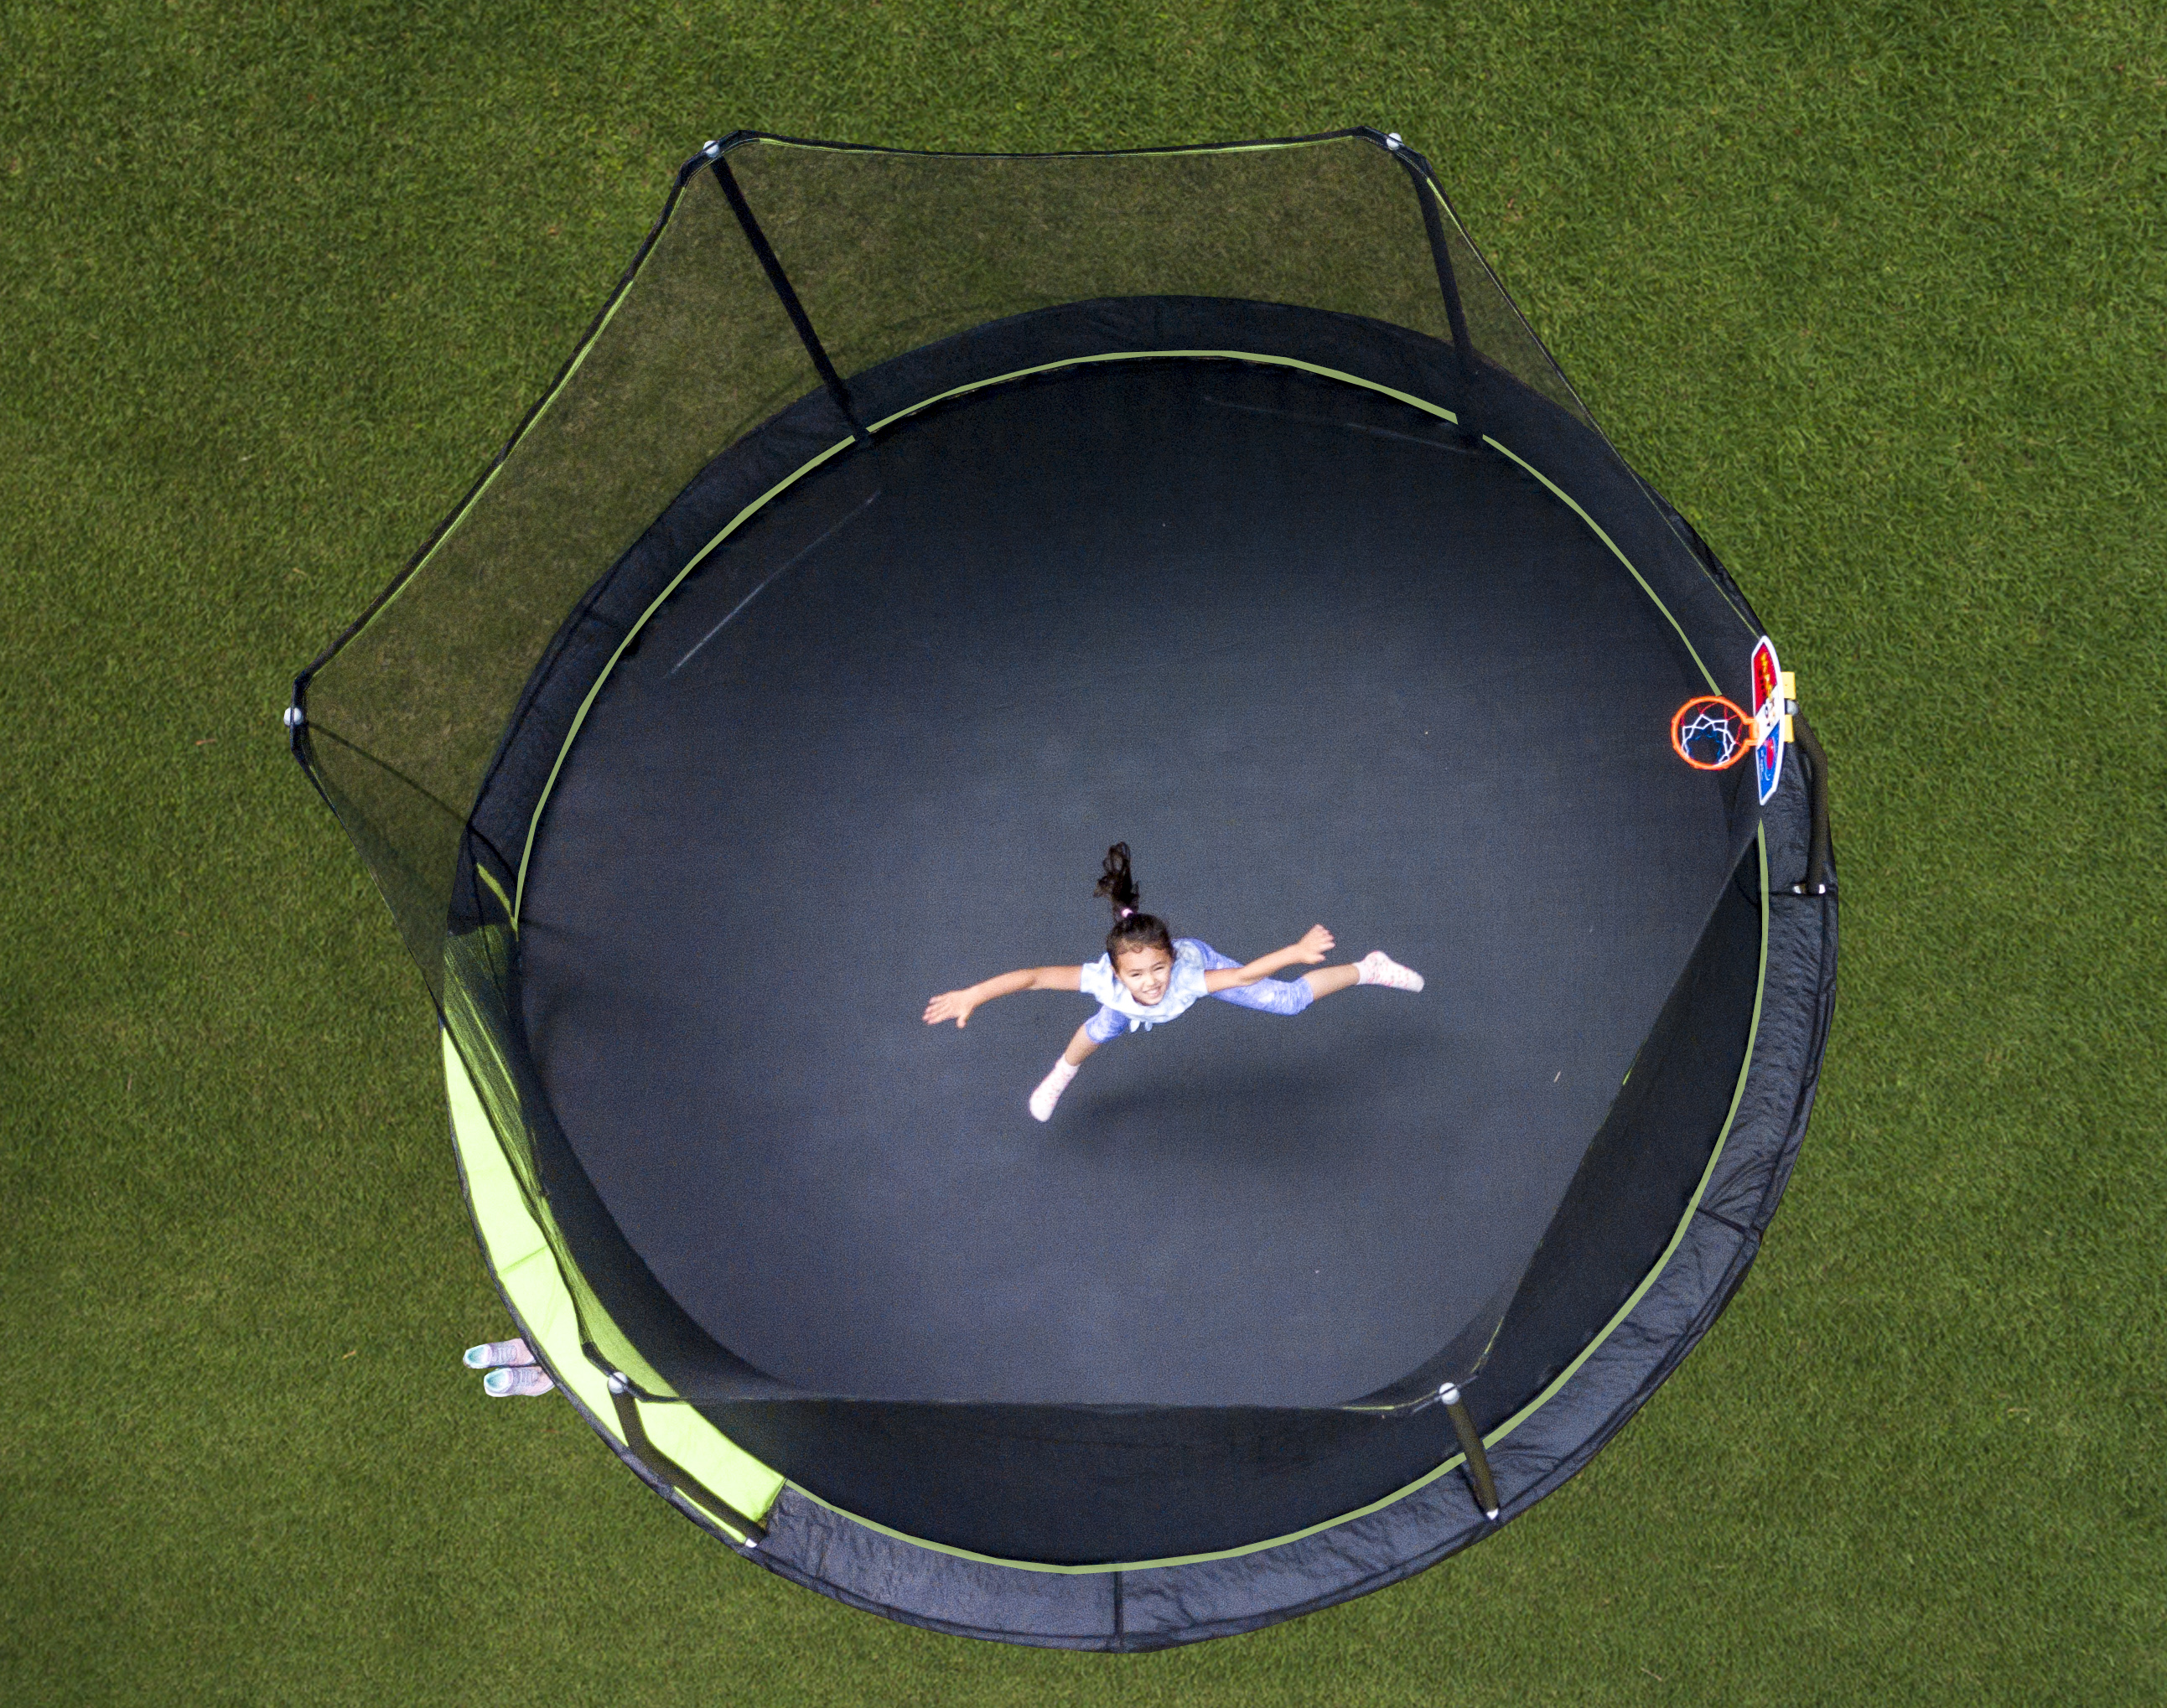 Jump King 14ft Trampoline With Basketball Hoop, Safety Enclosure, Green - image 3 of 10